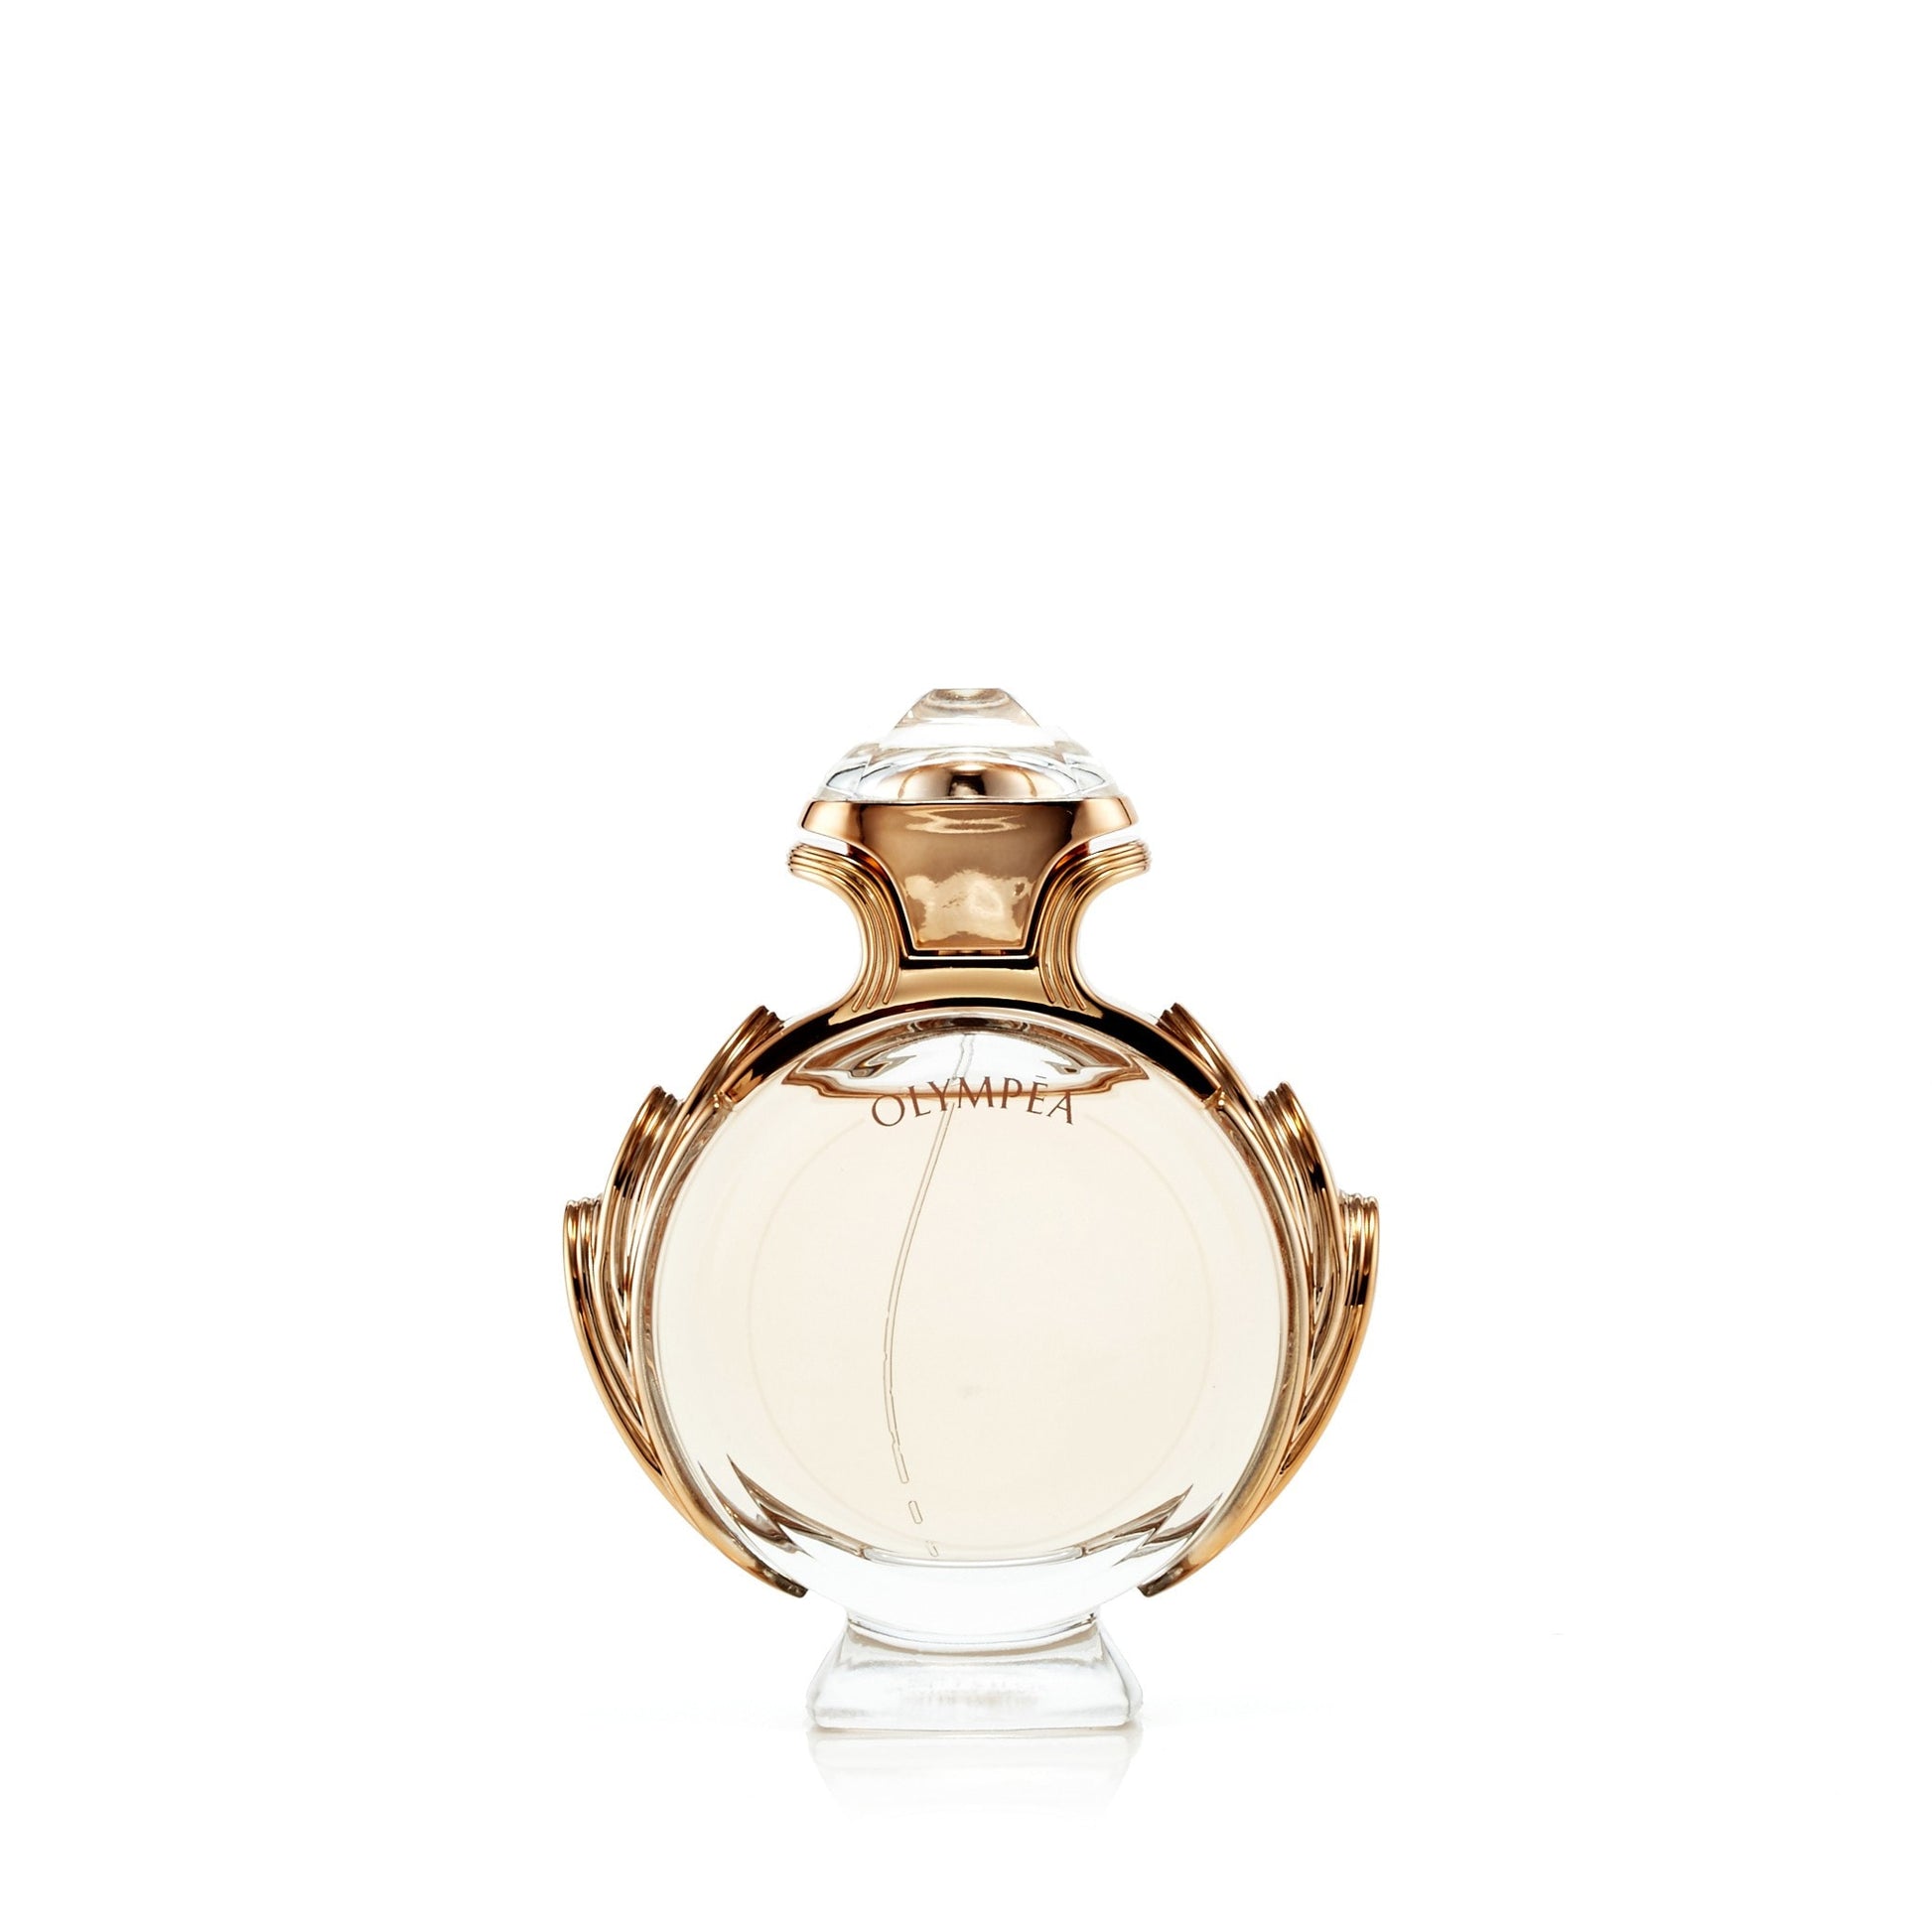 Olympea Eau de Parfum Spray for Women by Paco Rabanne, Product image 2